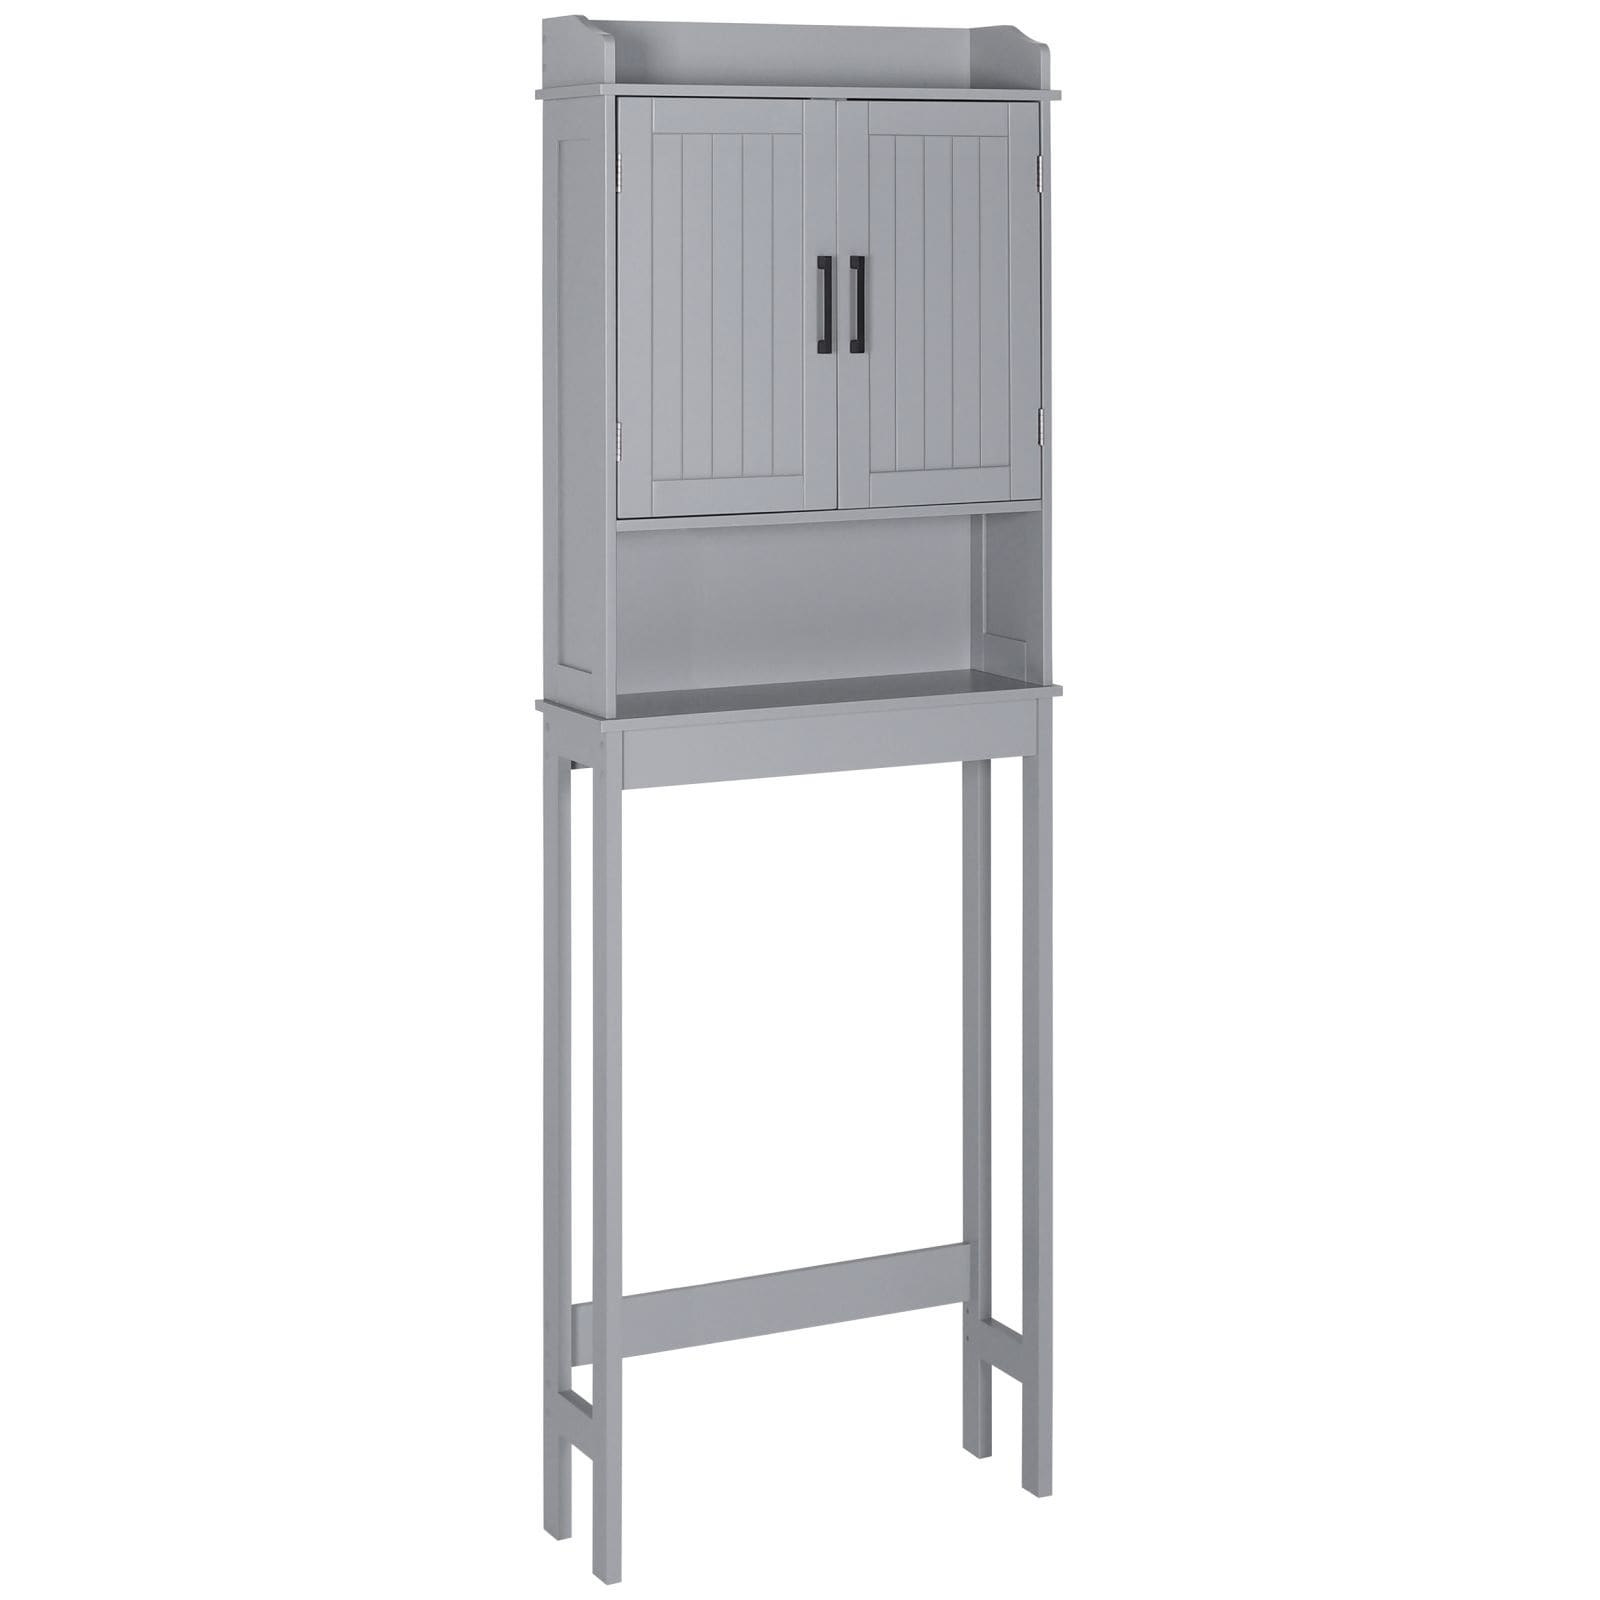 https://ak1.ostkcdn.com/images/products/is/images/direct/ecb346dd6cea211b5216ade18ad3ddc1a530a739/VEIKOUS-Over-The-Toilet-Storage-Cabinet-Bathroom-Organizer-with-Shelf-and-Cupboard.jpg